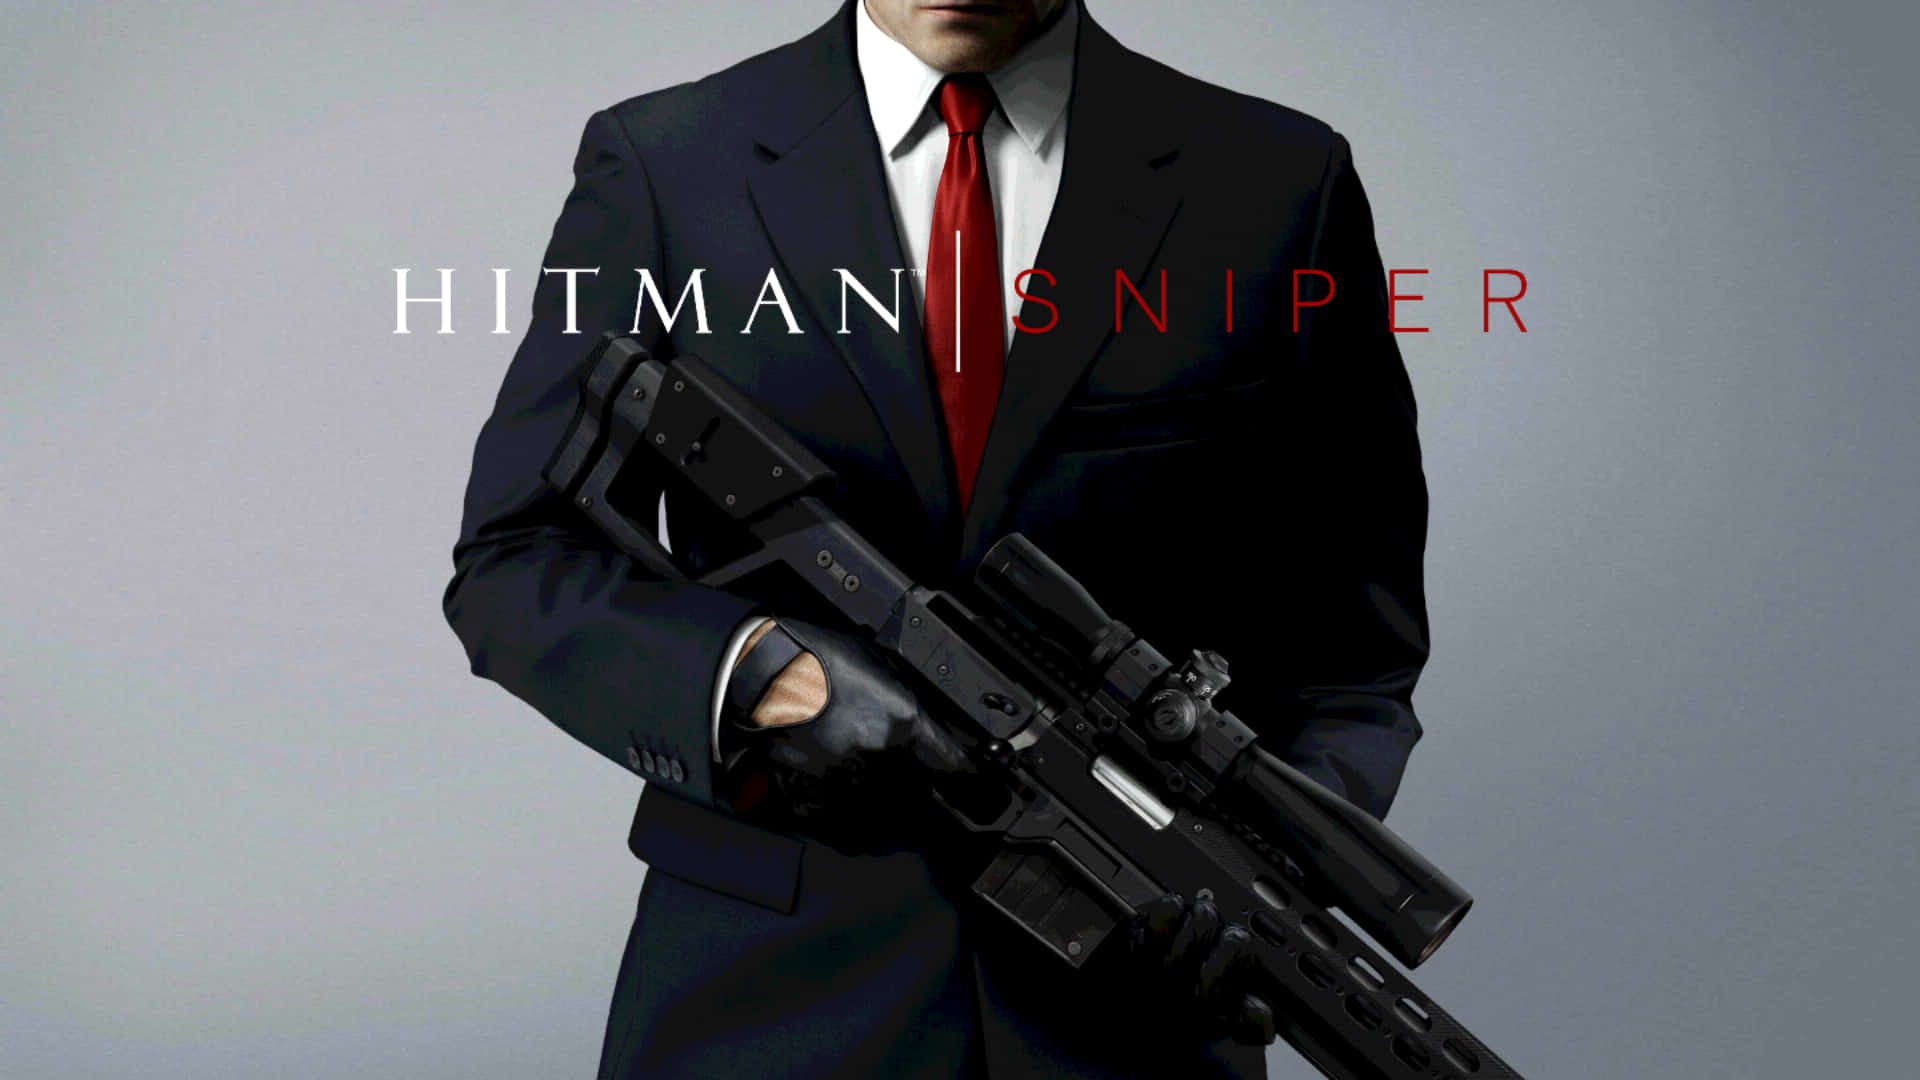 Step into Agent 47's shoes and get ready for an action-packed mission.